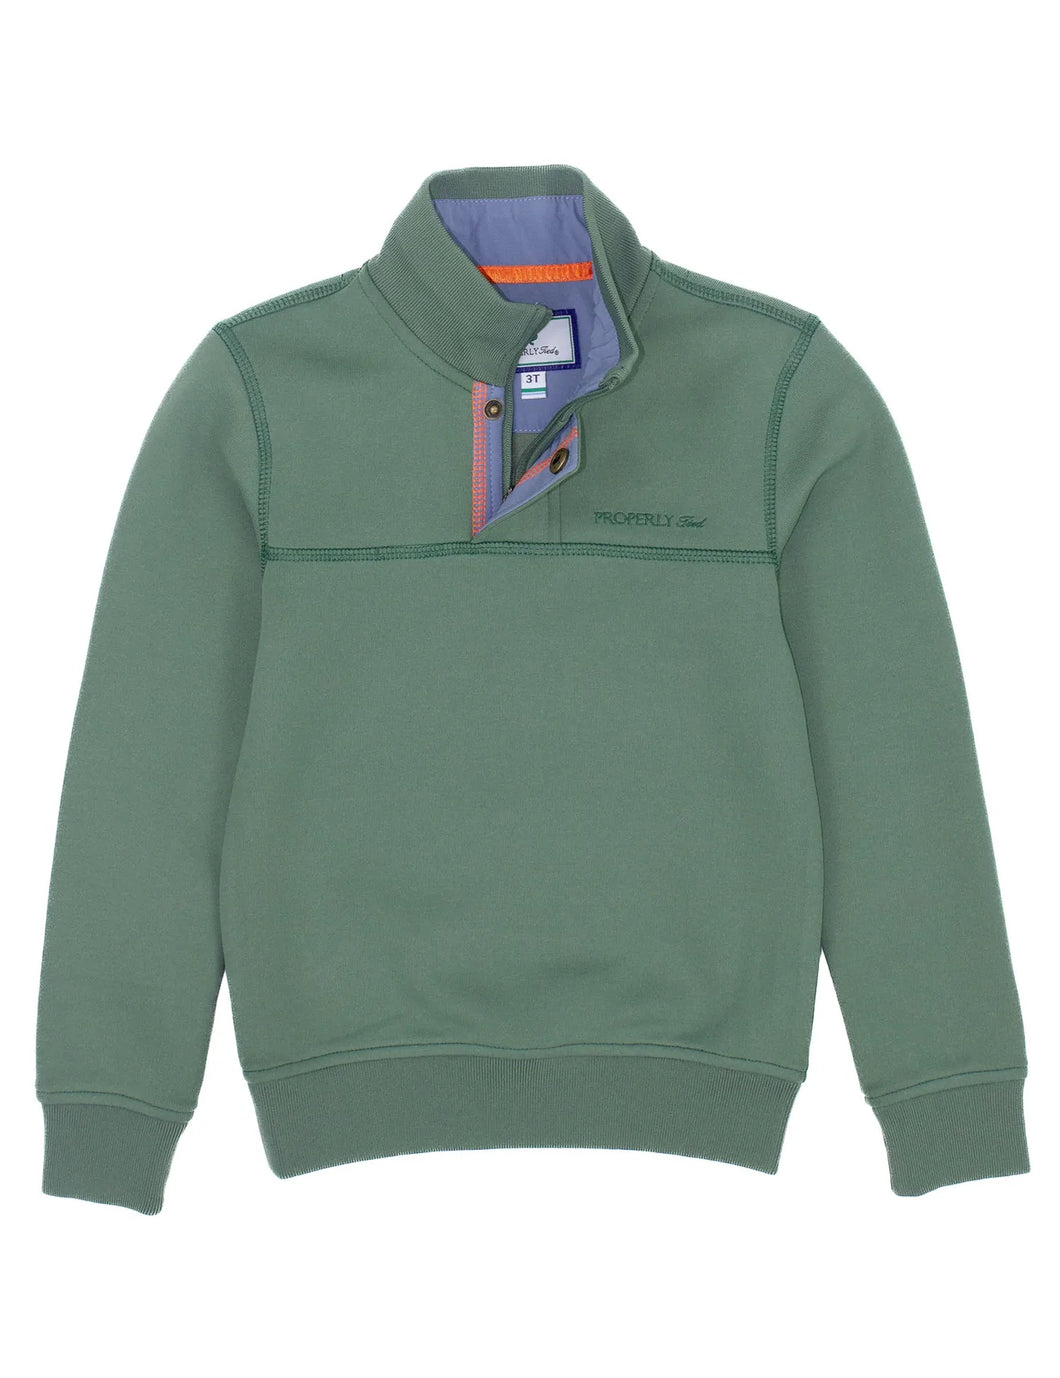 PROPERLY Tied - Kennedy Pullover -Olive